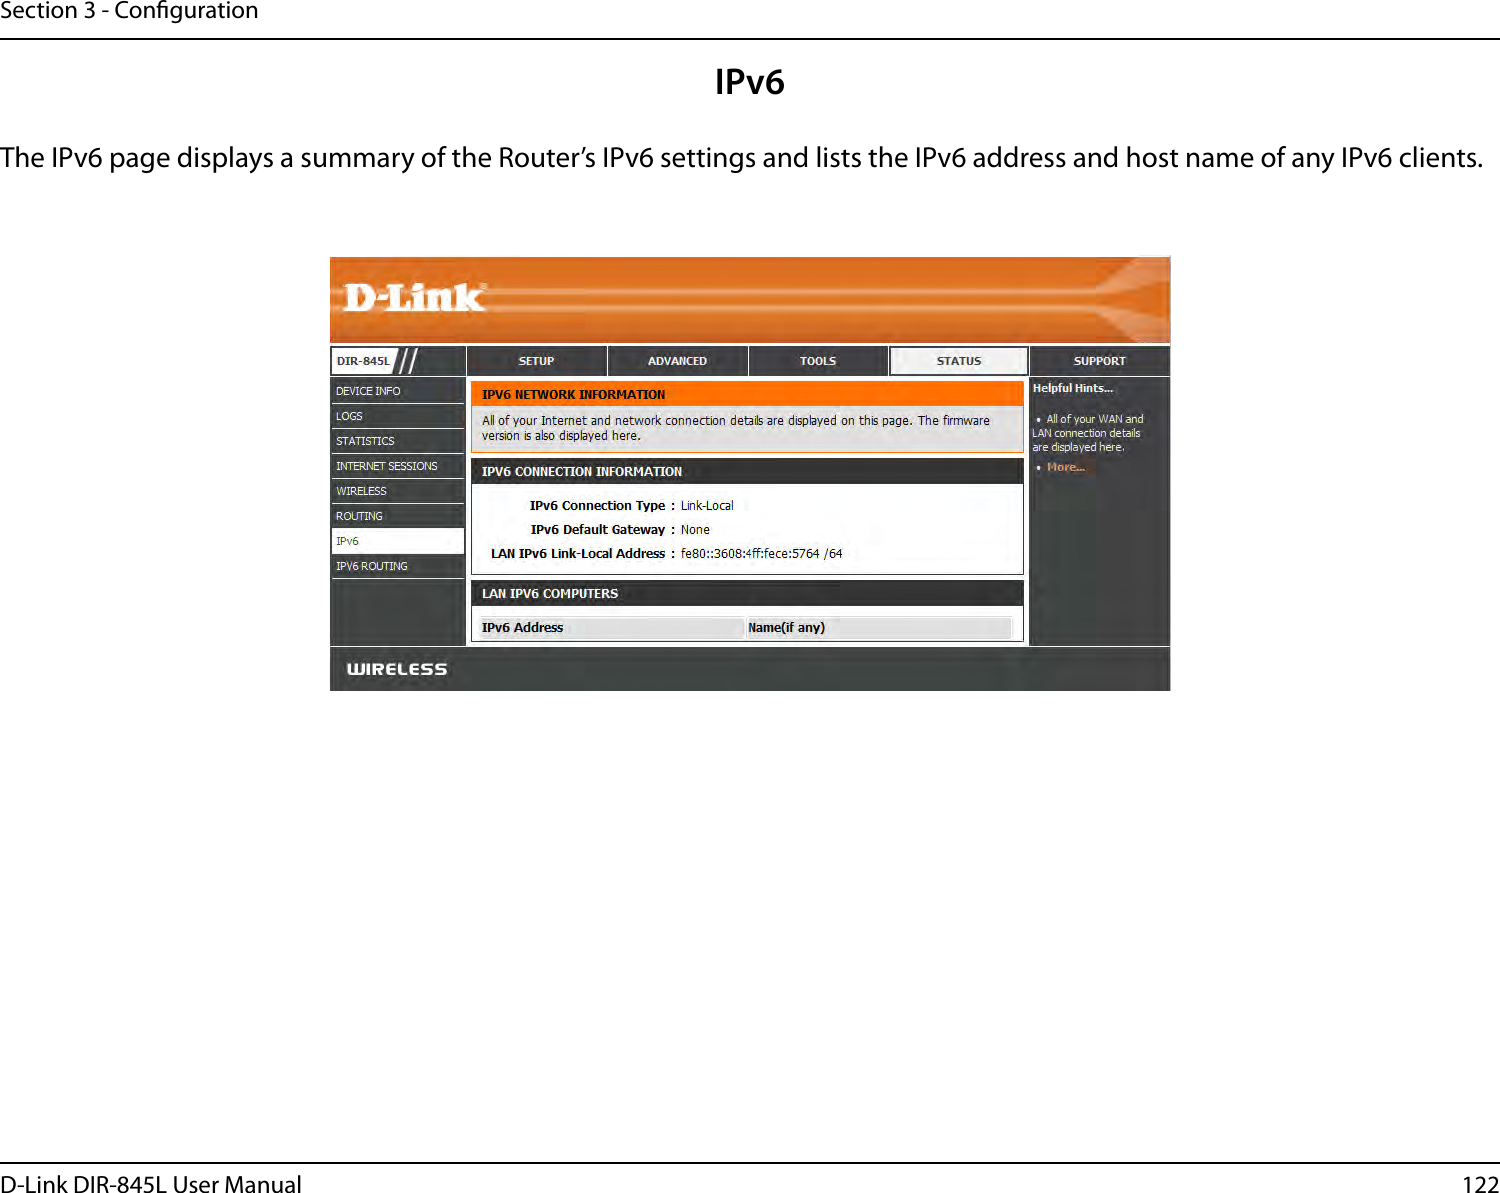 122D-Link DIR-845L User ManualSection 3 - CongurationIPv6The IPv6 page displays a summary of the Router’s IPv6 settings and lists the IPv6 address and host name of any IPv6 clients. 